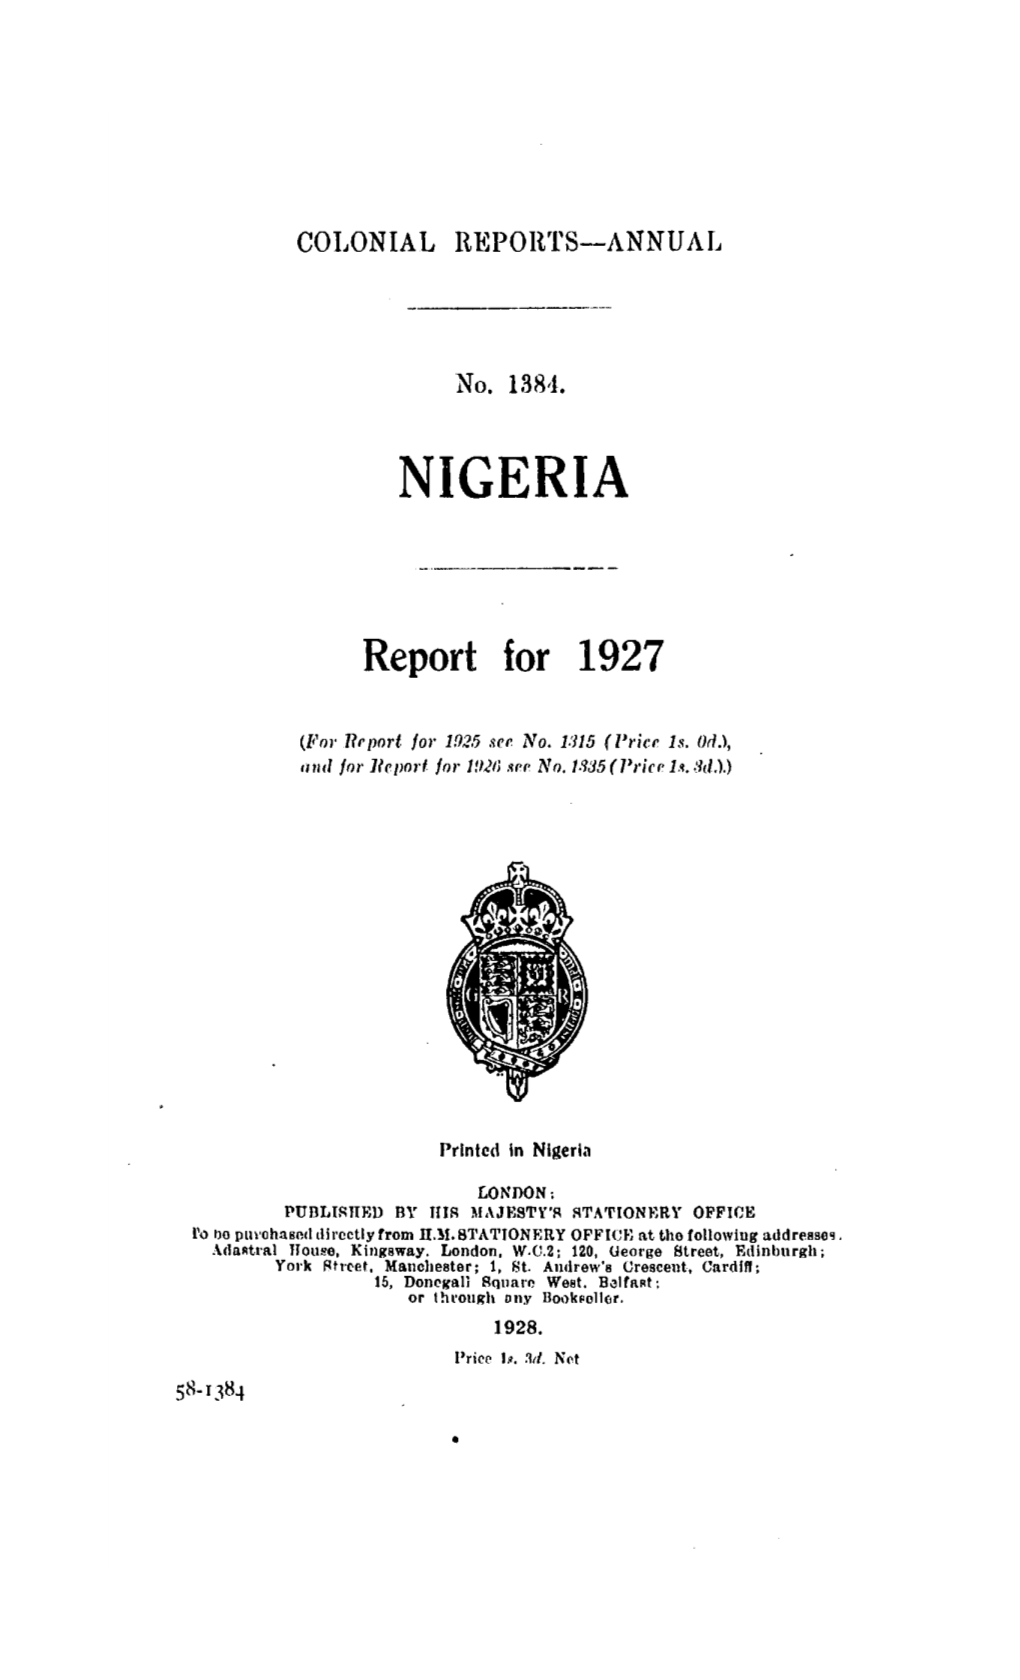 Annual Report of the Colonies, Nigeria, 1927